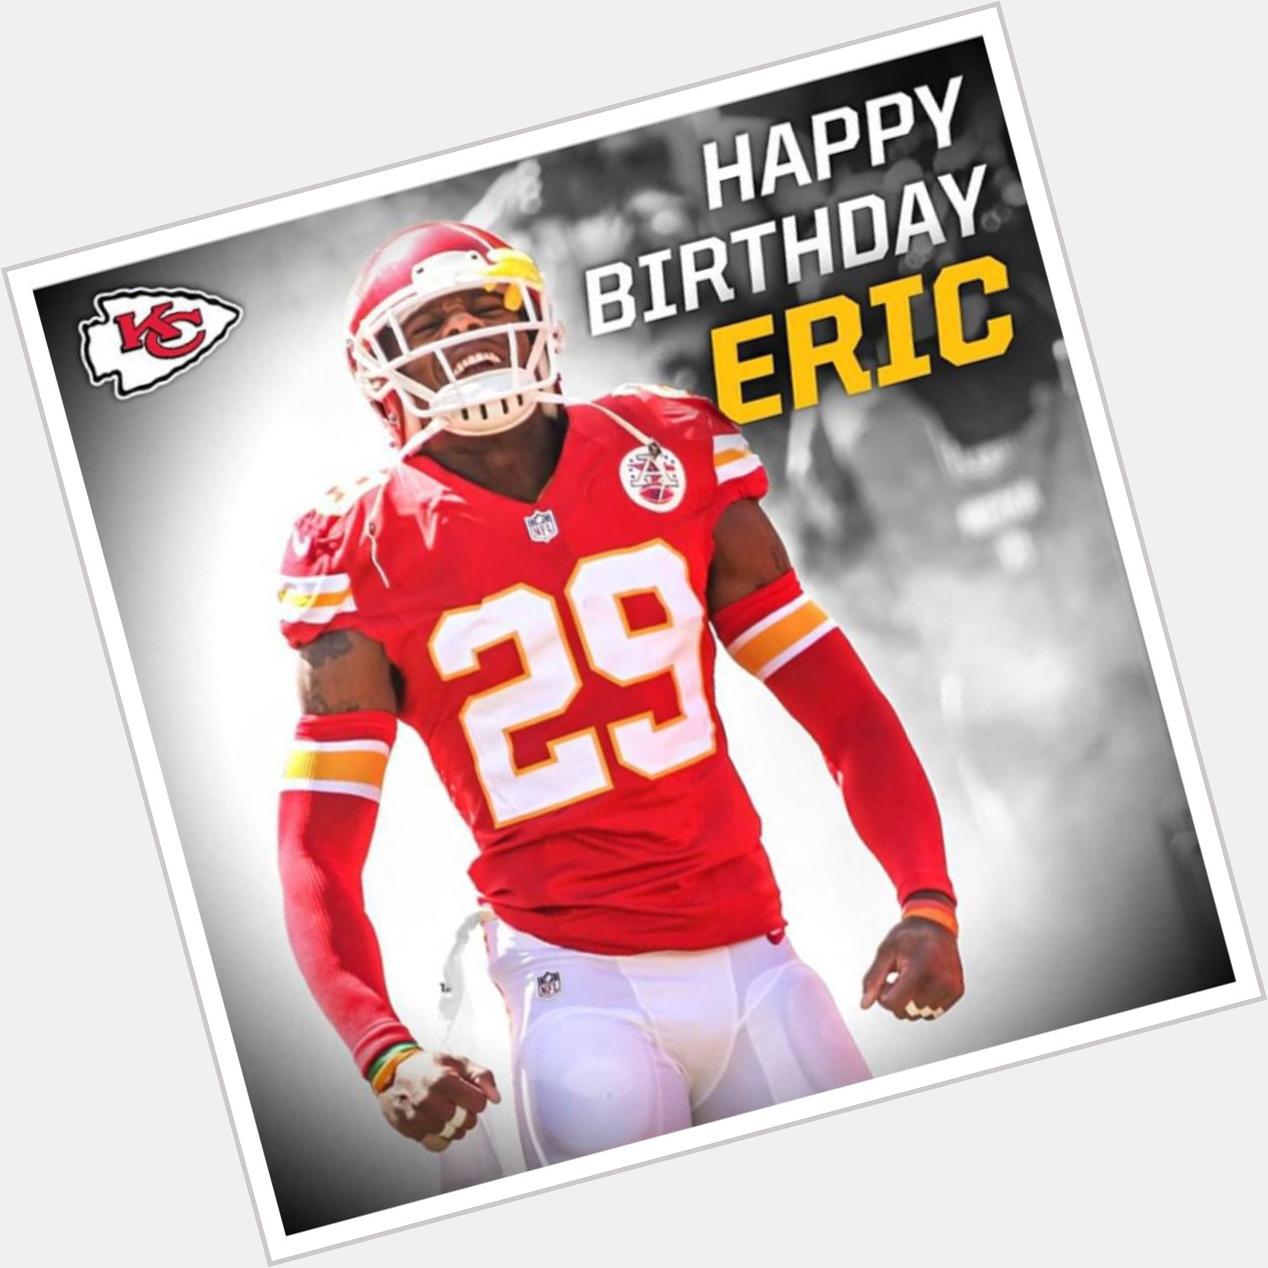 Happy Birthday to one of our clients, Eric Berry! 